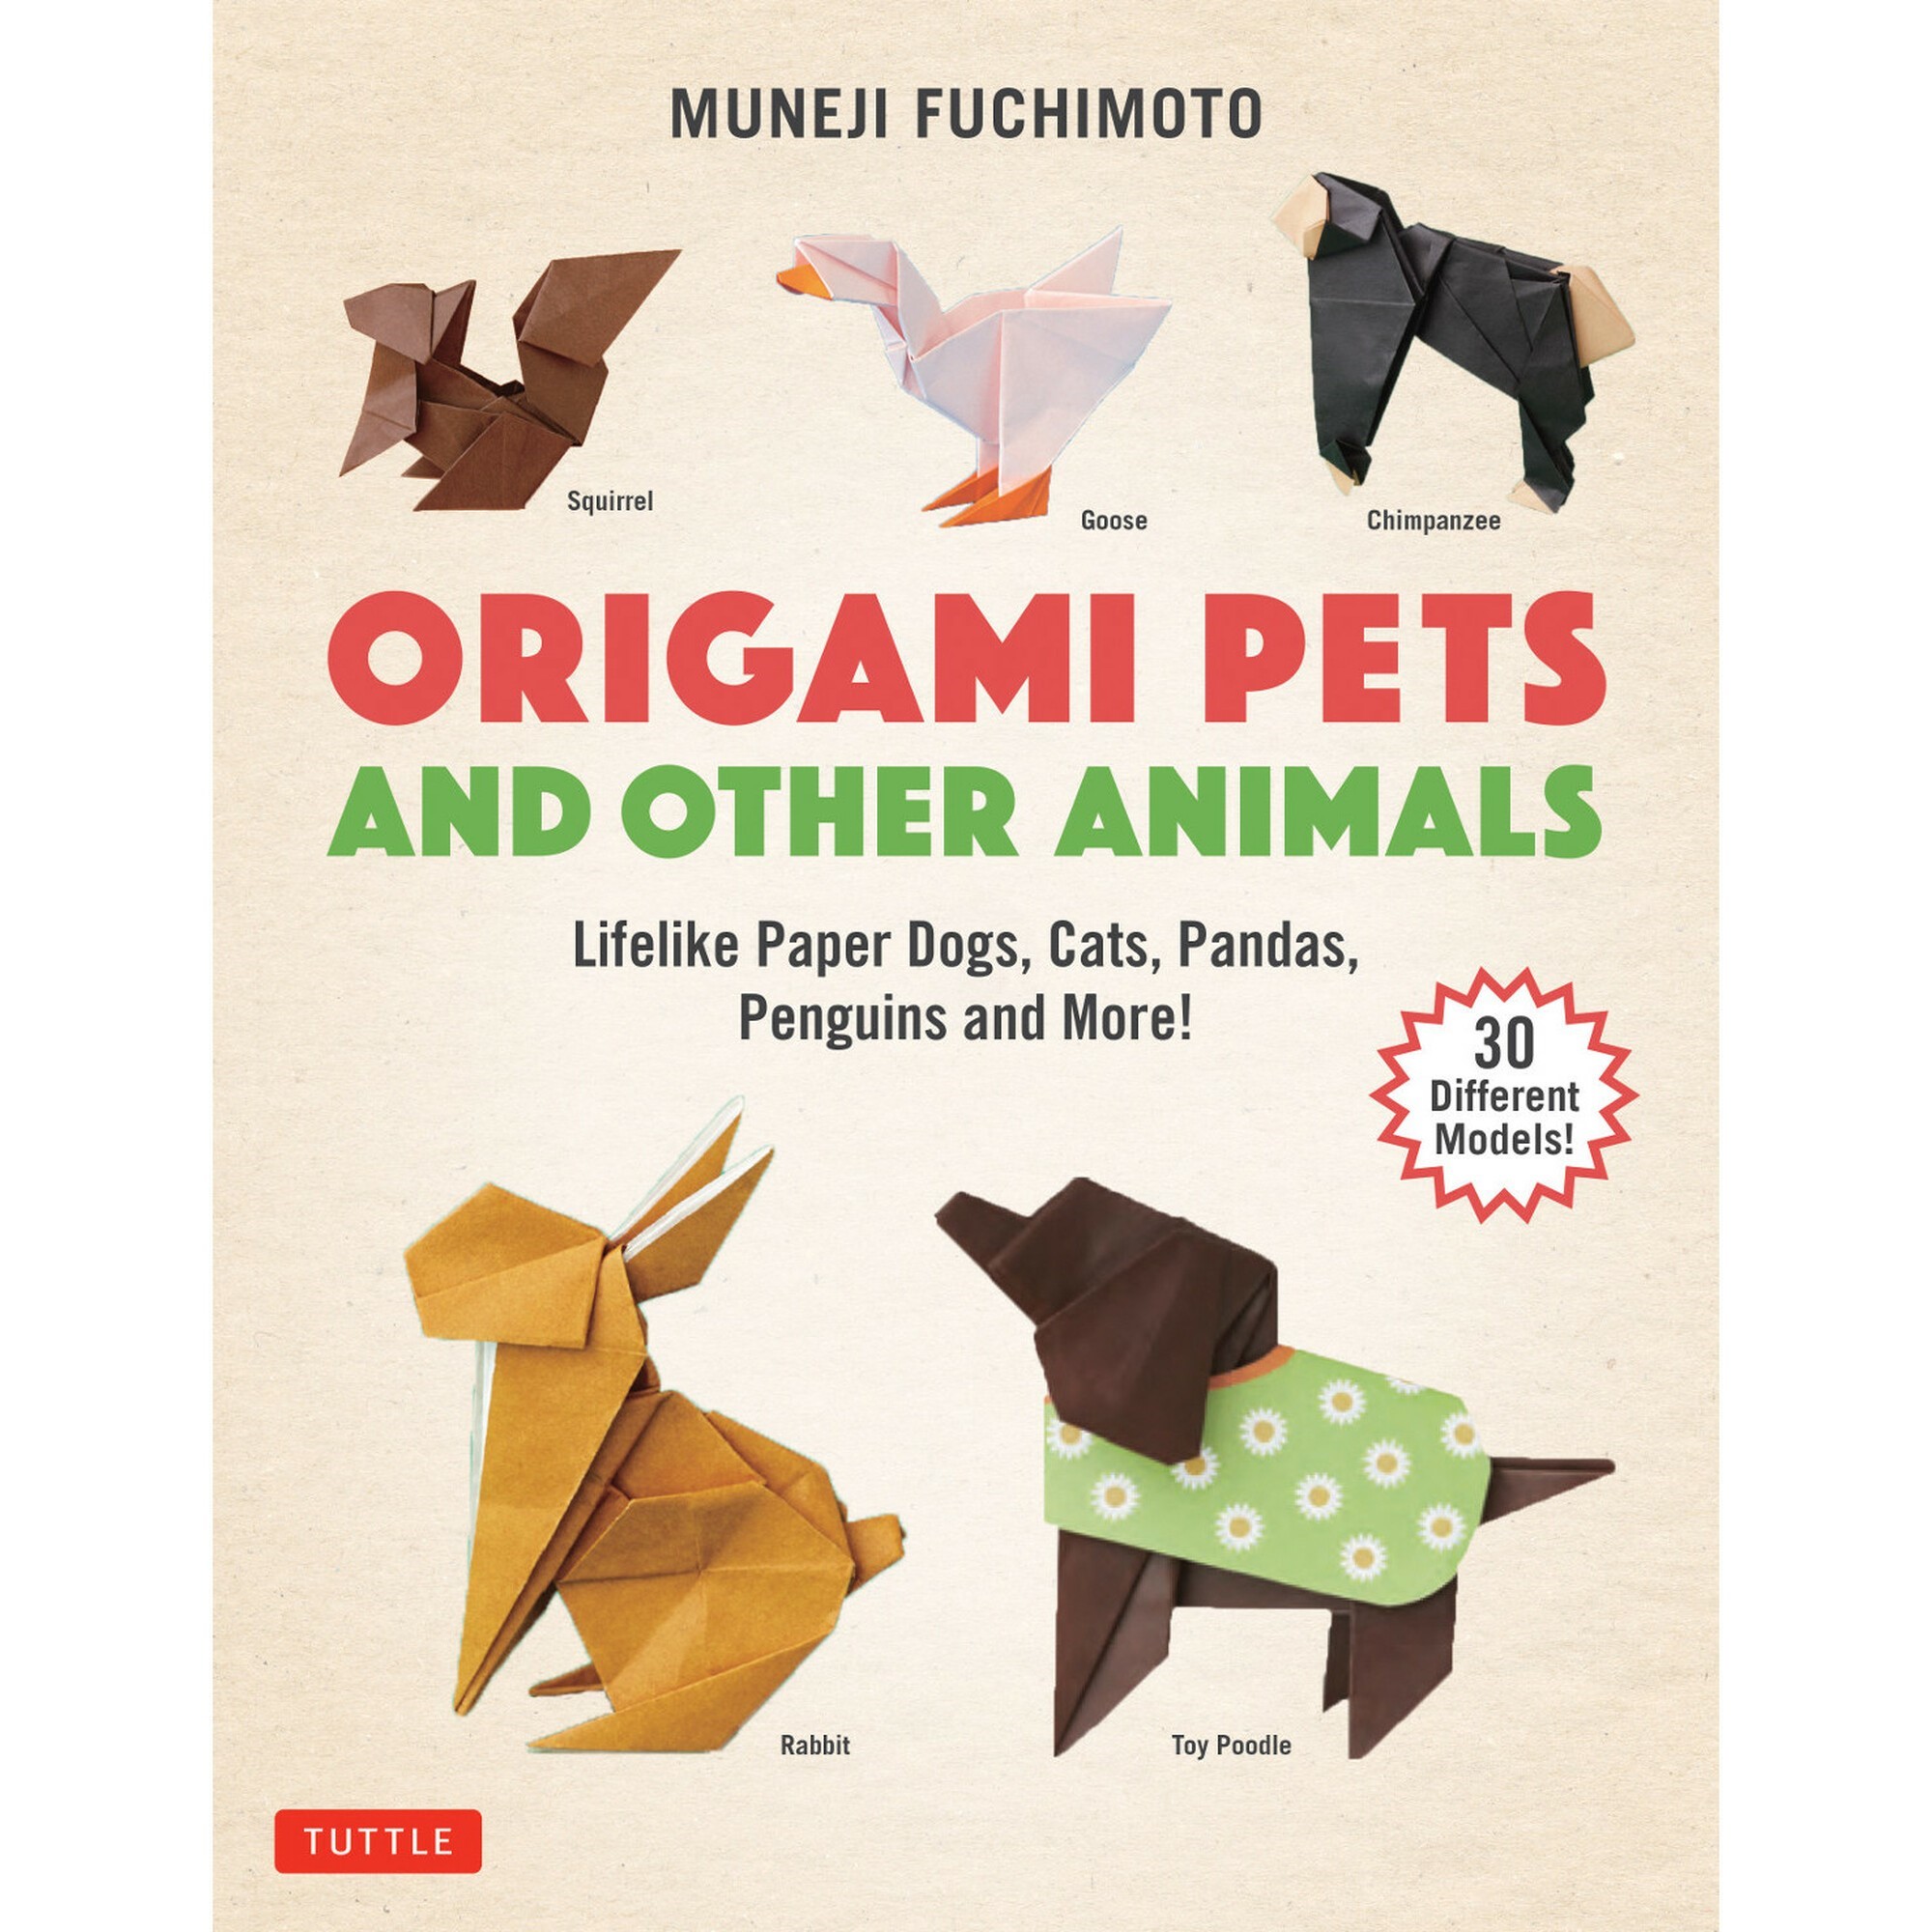 Origami Pets and Other Animalsの商品画像